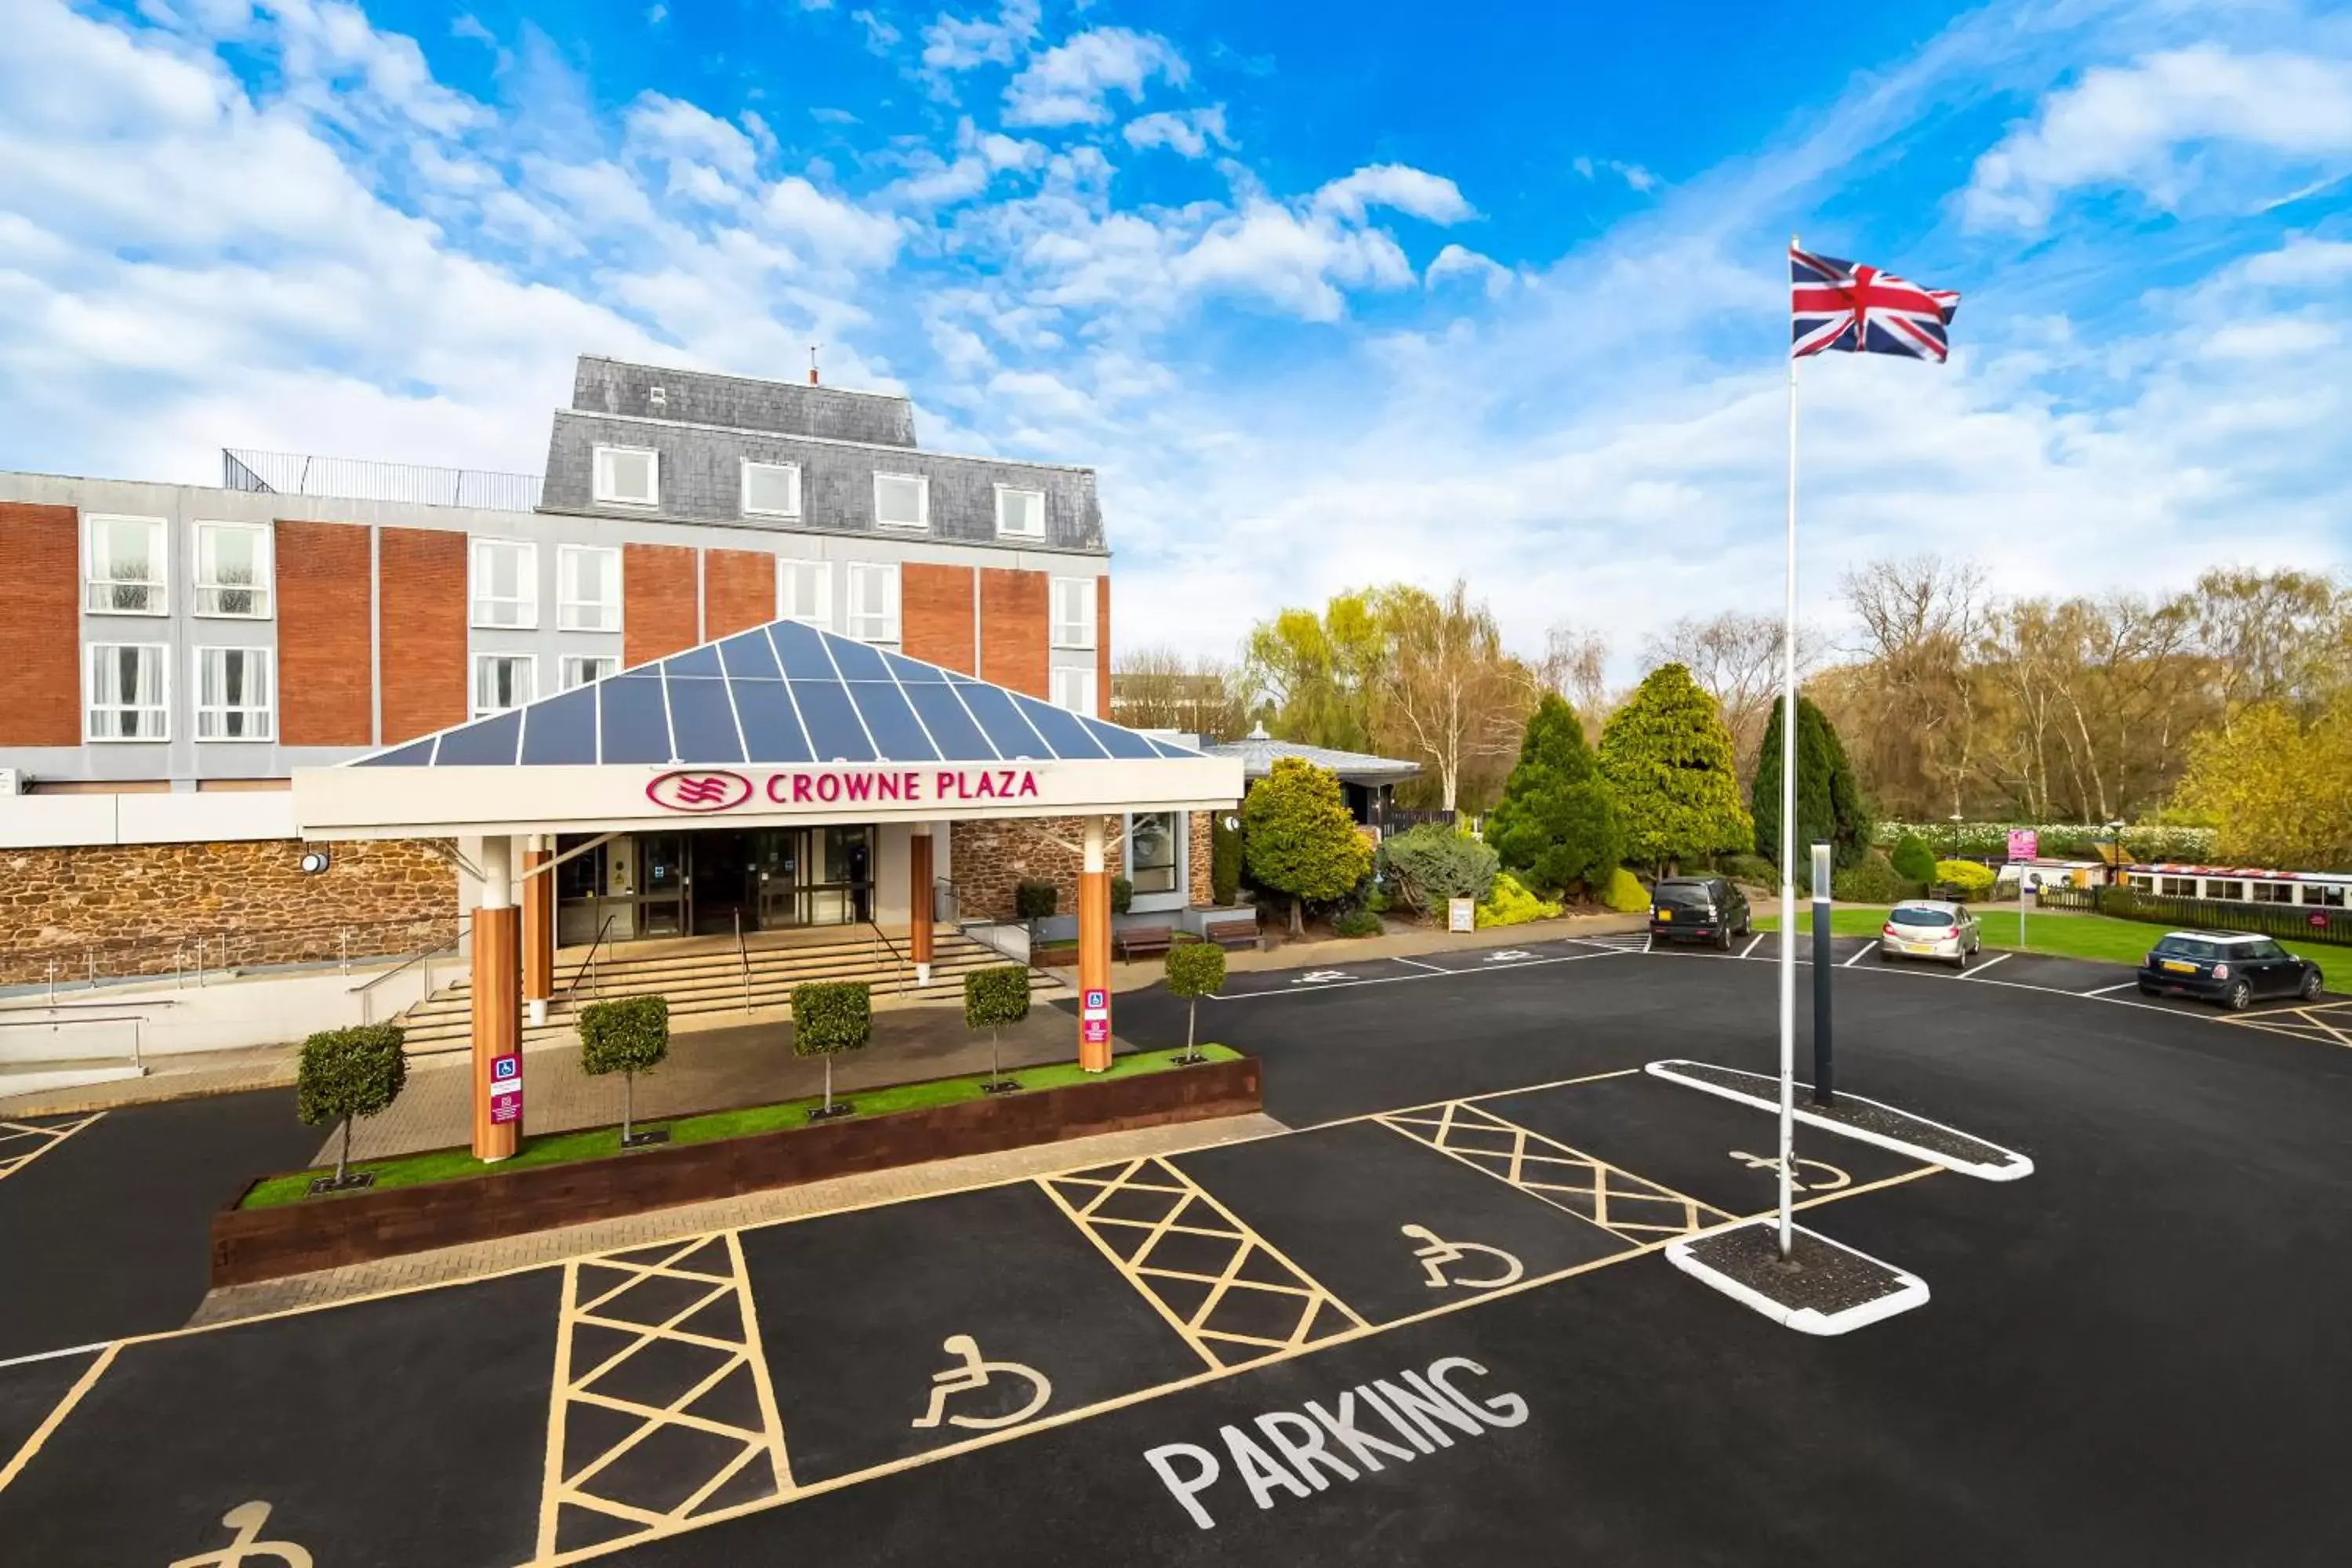 Property building in Crowne Plaza Stratford-upon-Avon, an IHG Hotel